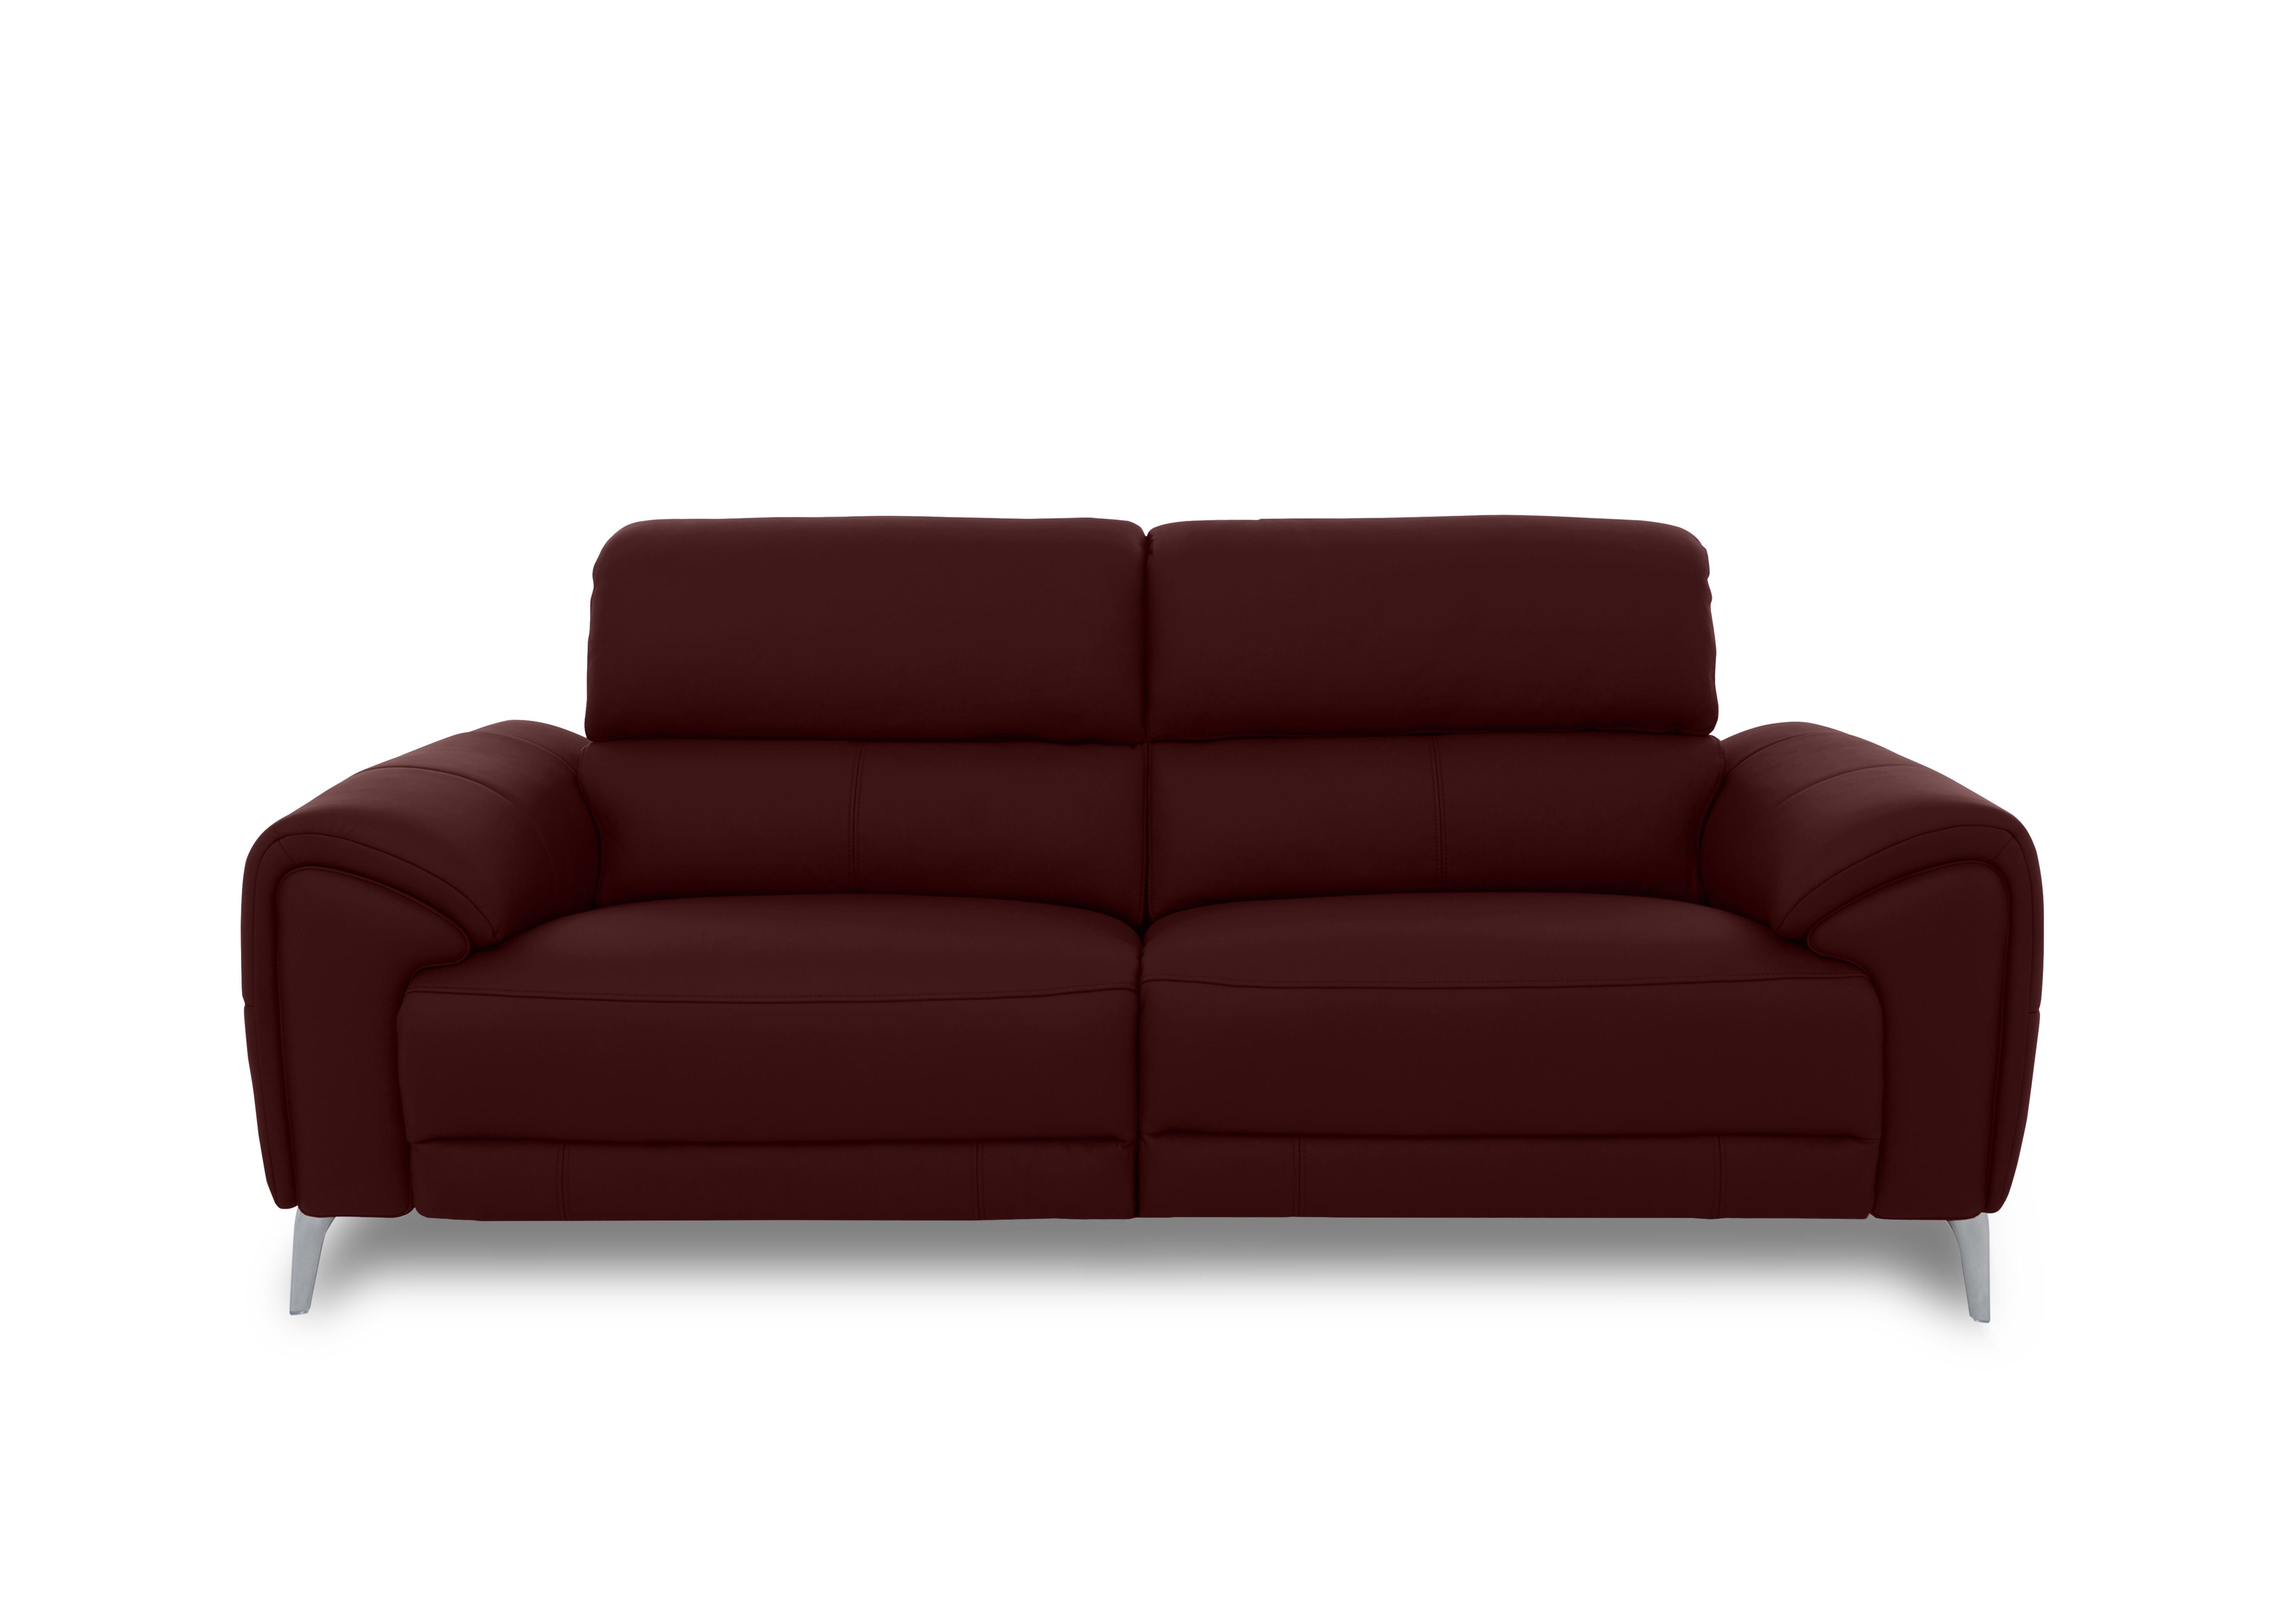 Vino Leather 3 Seater Sofa in Cat-60/15 Ruby on Furniture Village